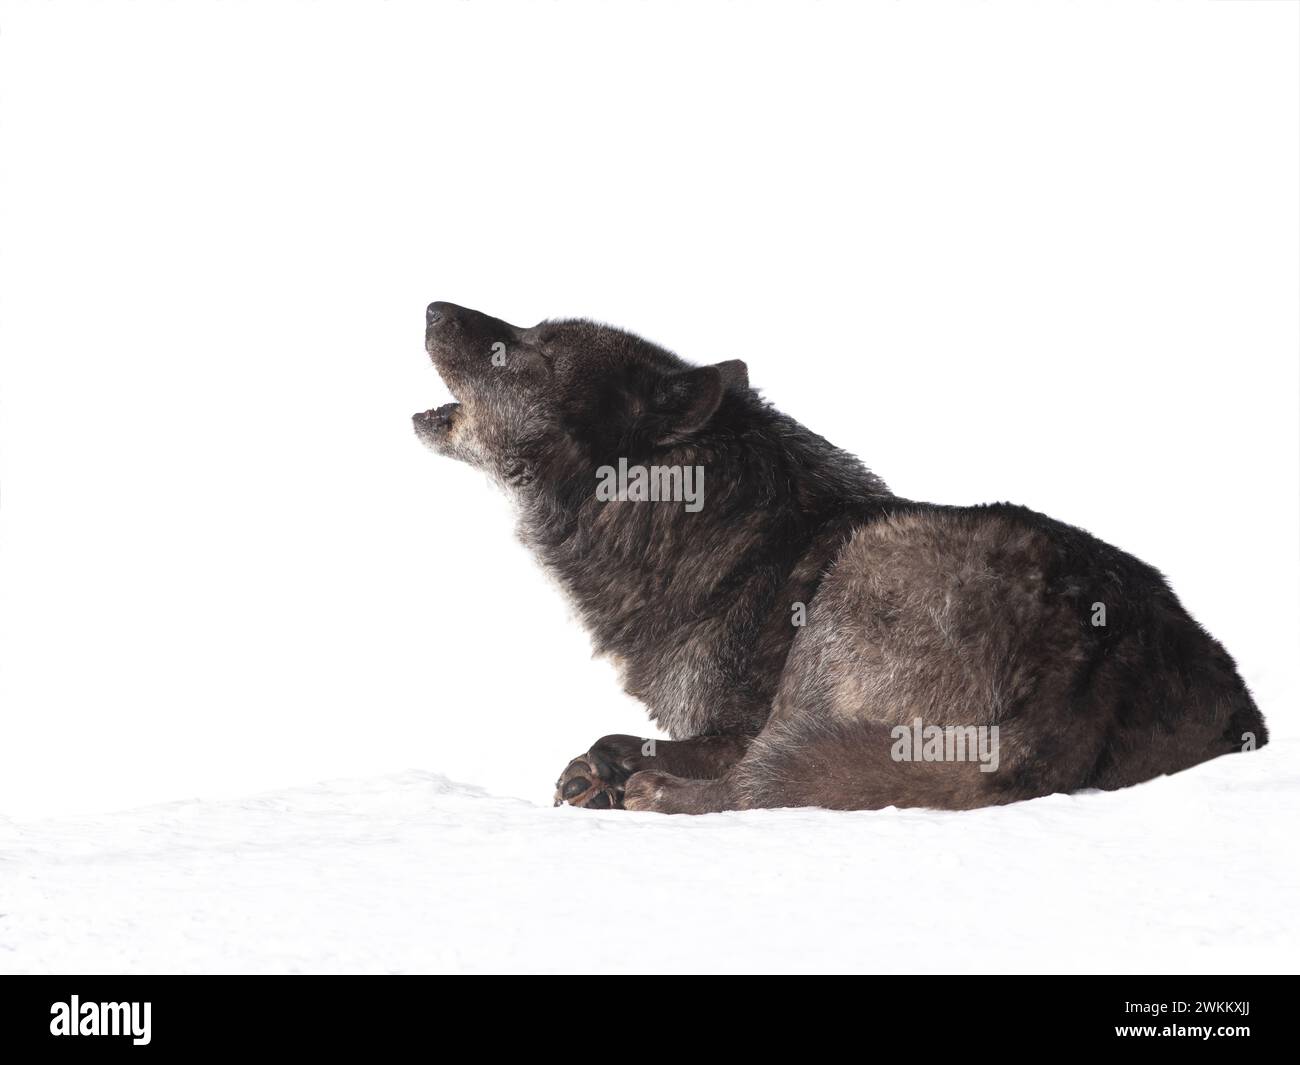 A howling black wolf lies on white snow. Stock Photo